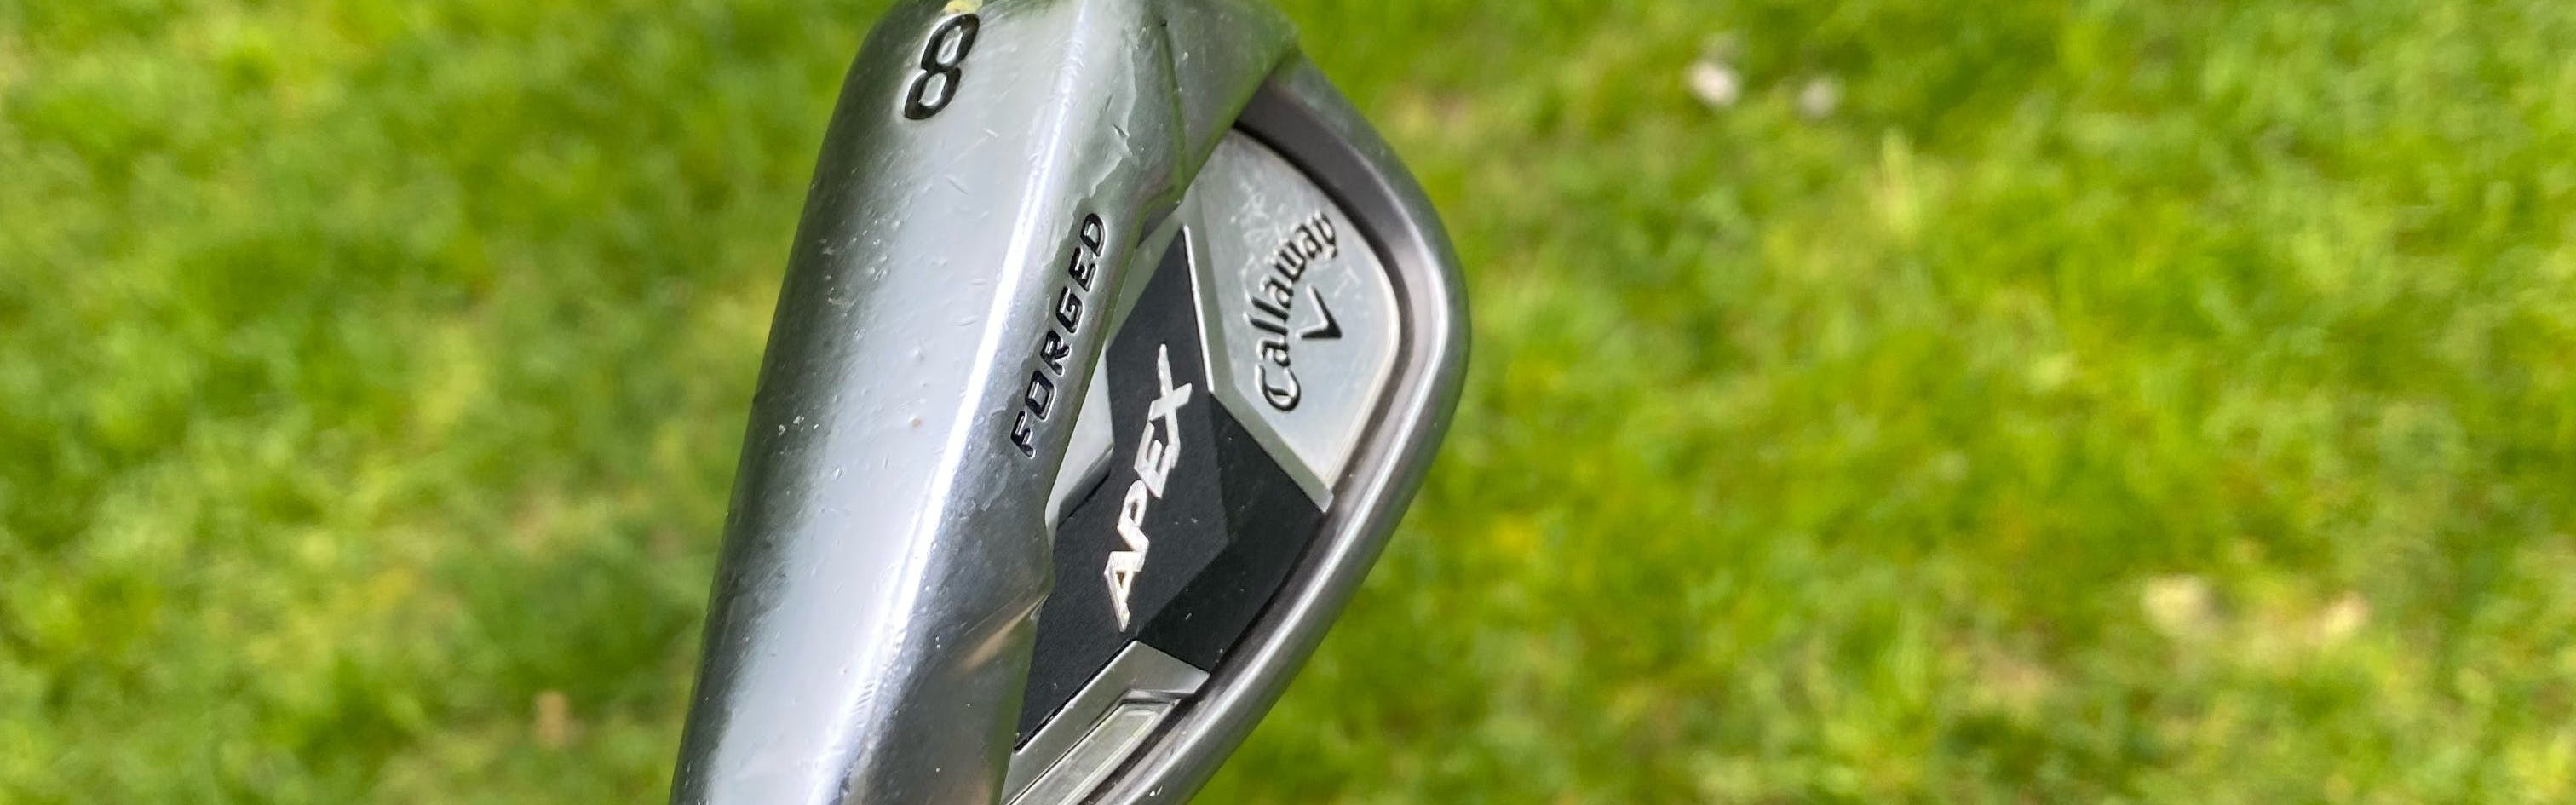 Expert Review Callaway Apex 2021 Single Irons Curated